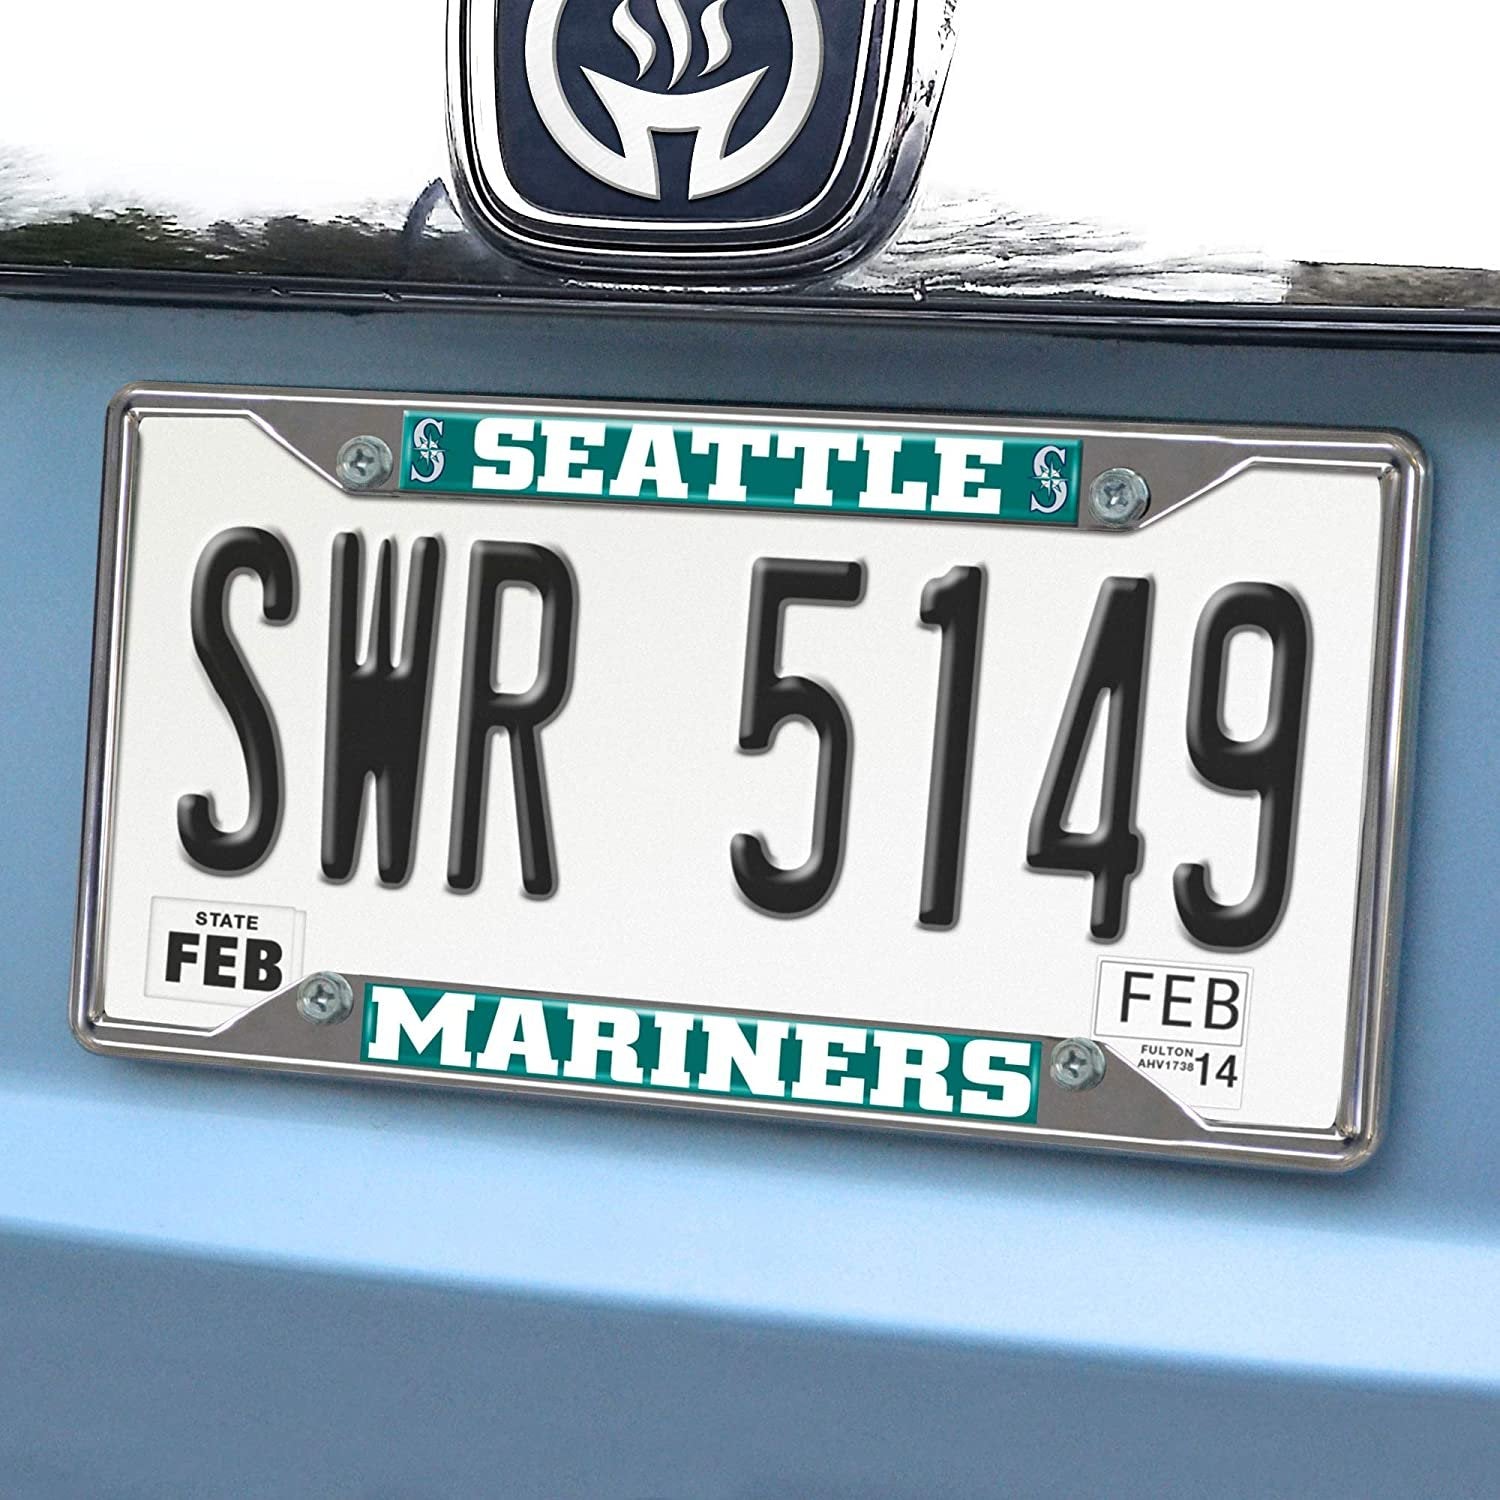 Seattle Mariners Metal License Plate Frame Chrome Tag Cover 6x12 Inch